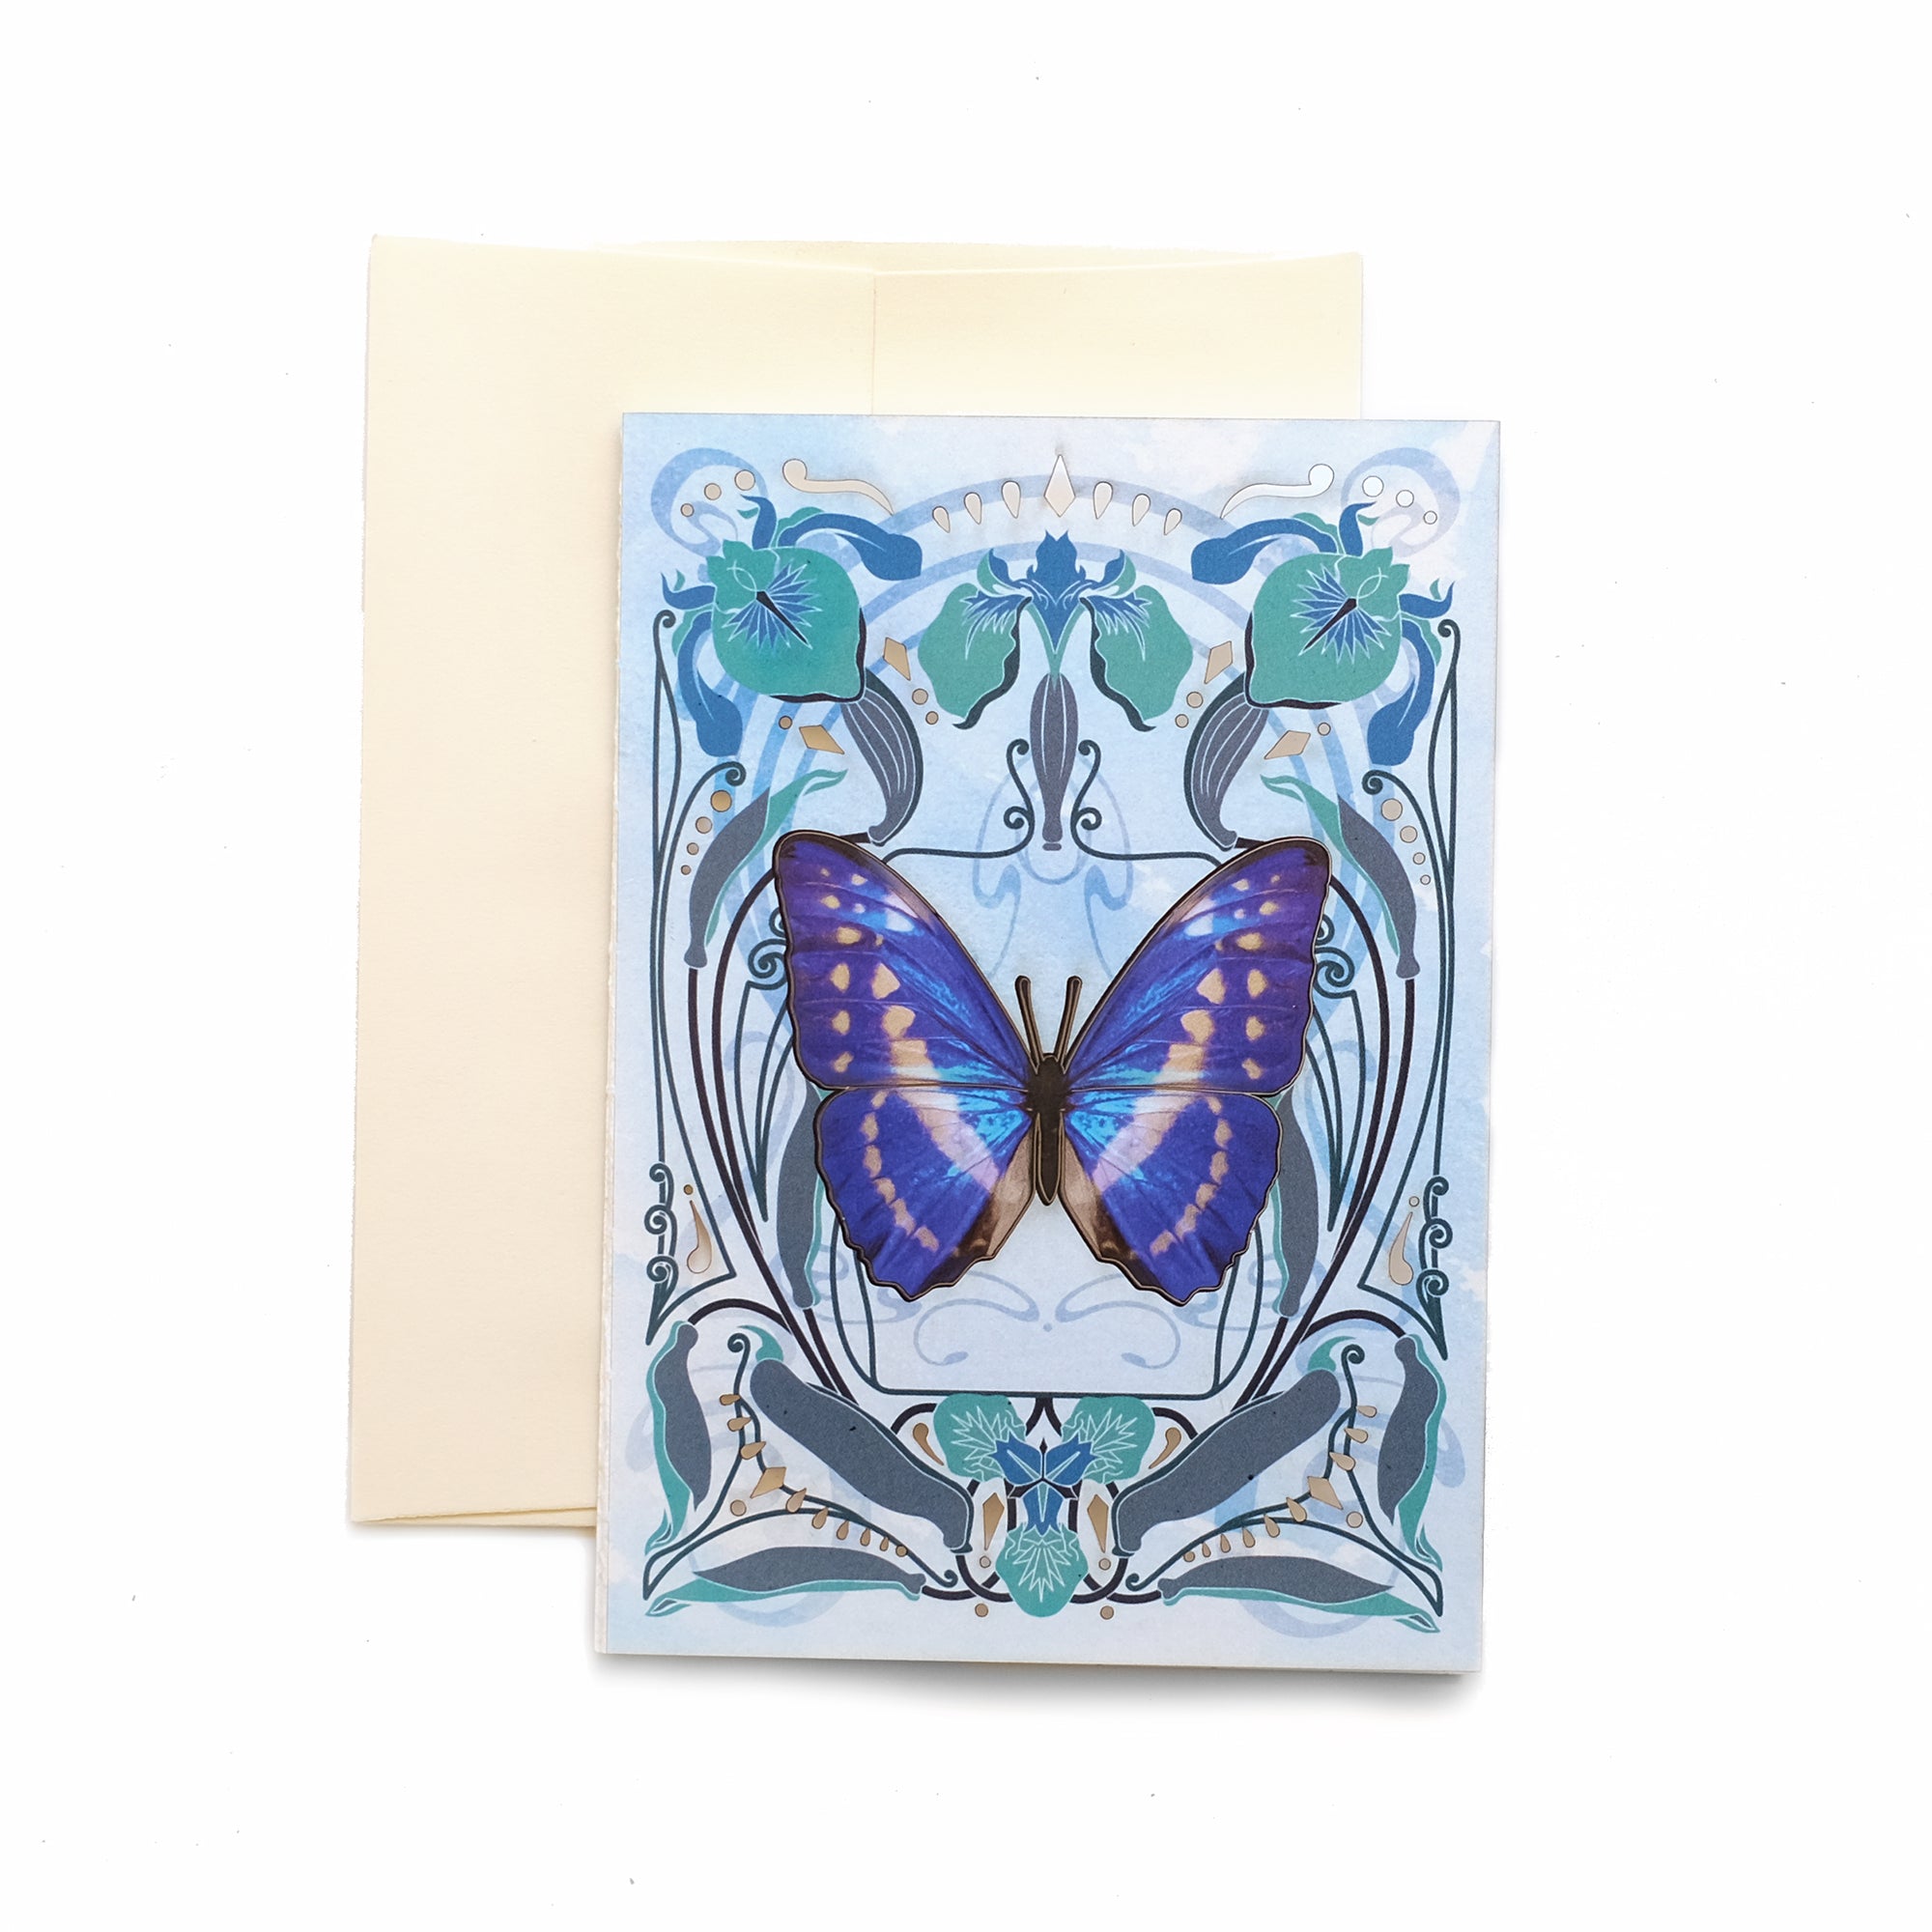 White & Blue Morpho Butterfly 'Pop-Out' Greeting Card - Set of 4 - Reseller Wholesale